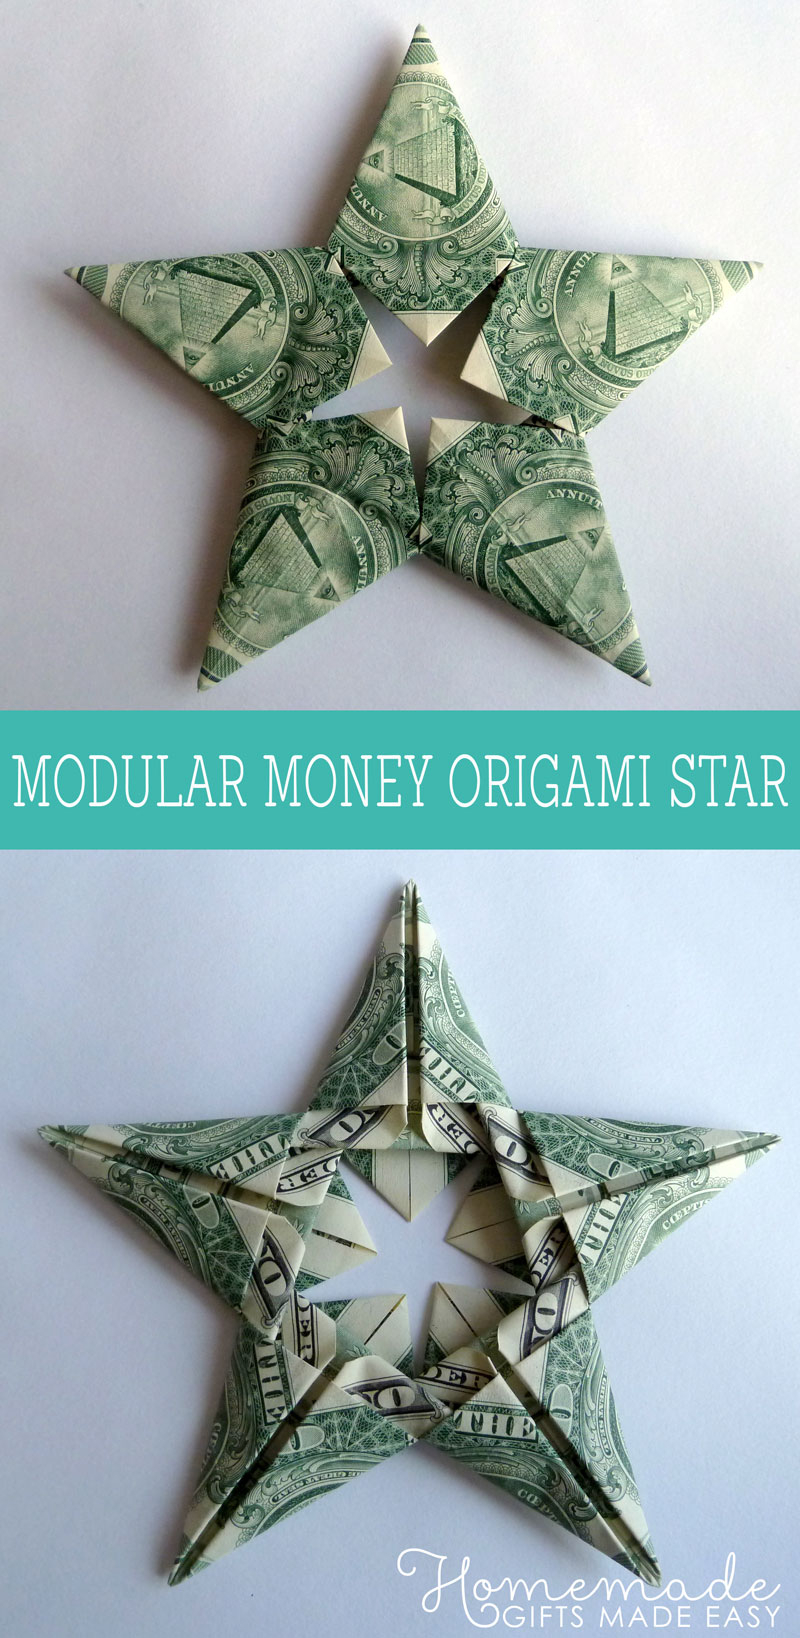 Christmas Money Origami Instructions Modular Money Origami Star From 5 Bills How To Fold Step Step